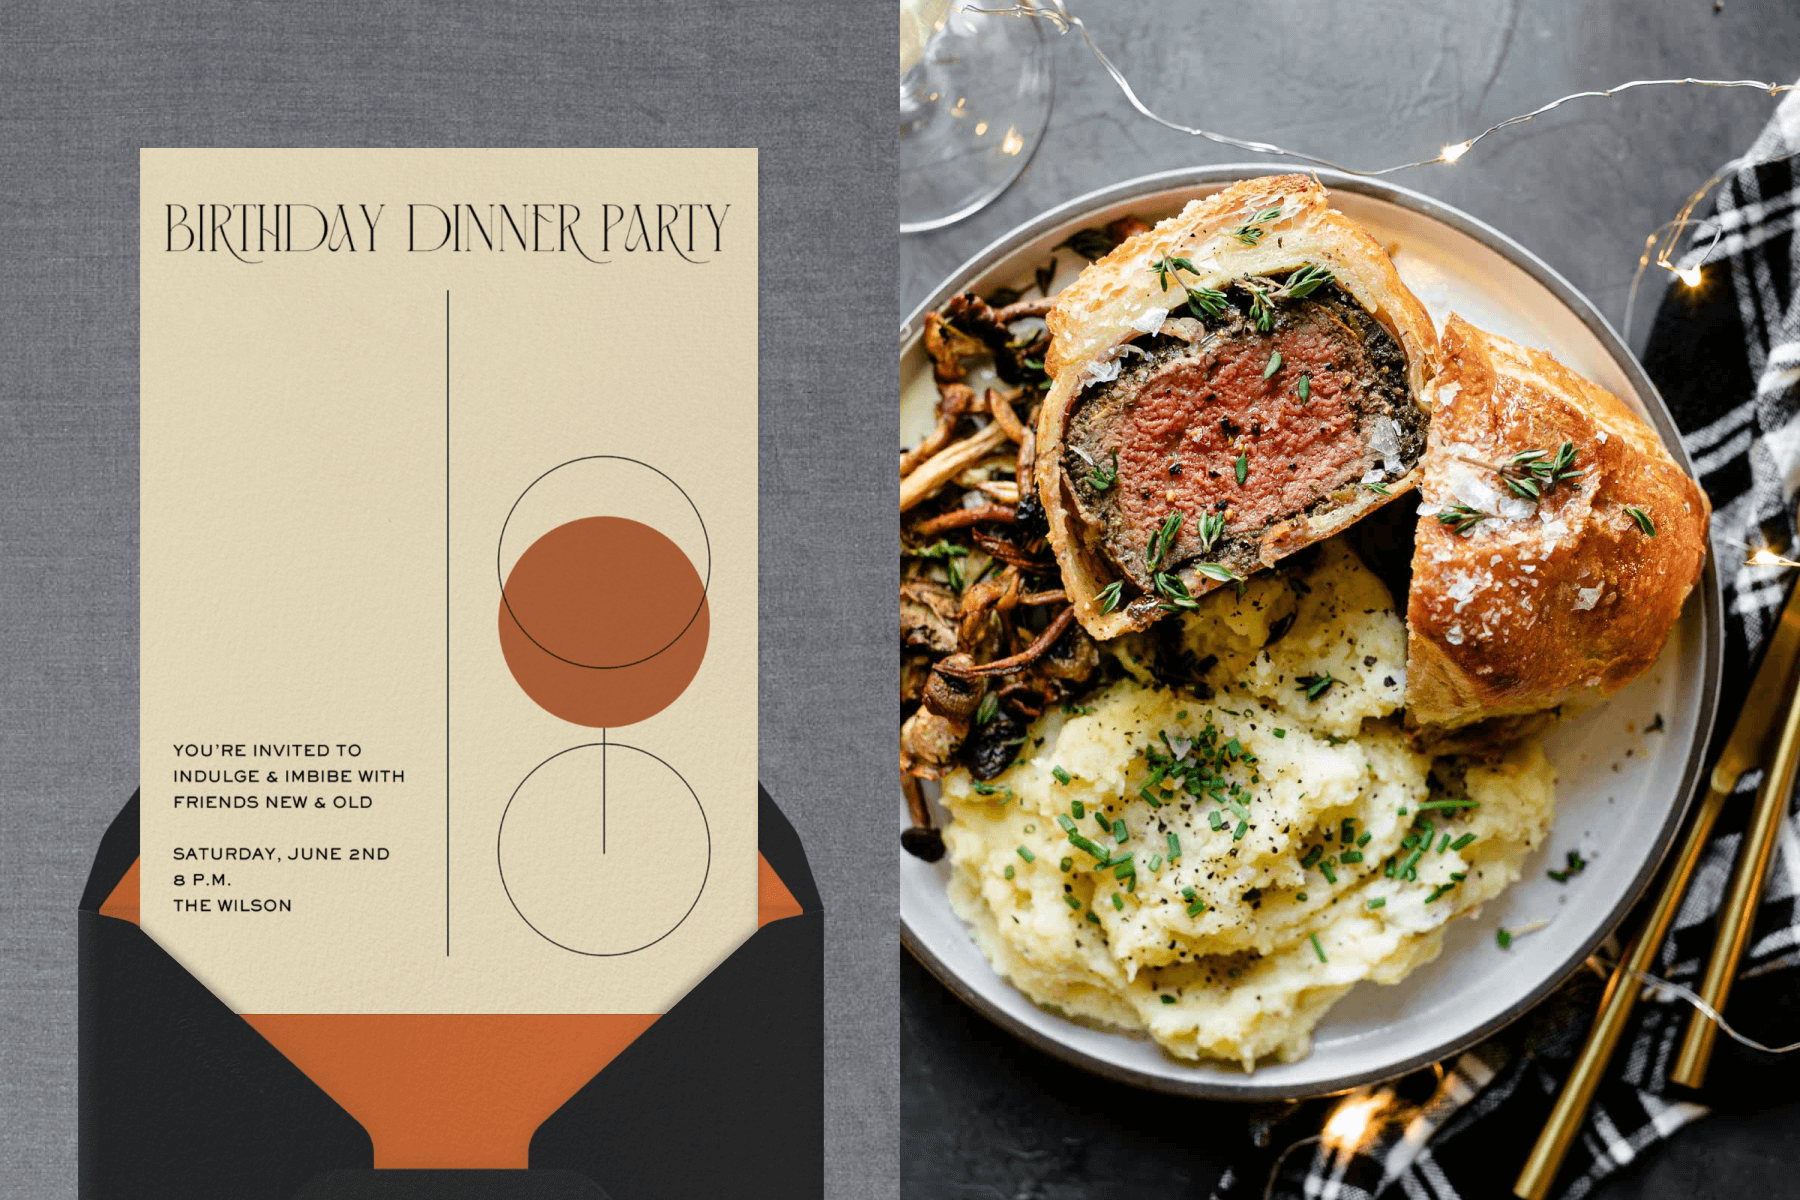 left: An off-white invitation with a minimalist drawing of a wine glass, constructed of circles and lines, on the right. Right: A dish with beef Wellington and mashed potatoes with twinkle lights around it.